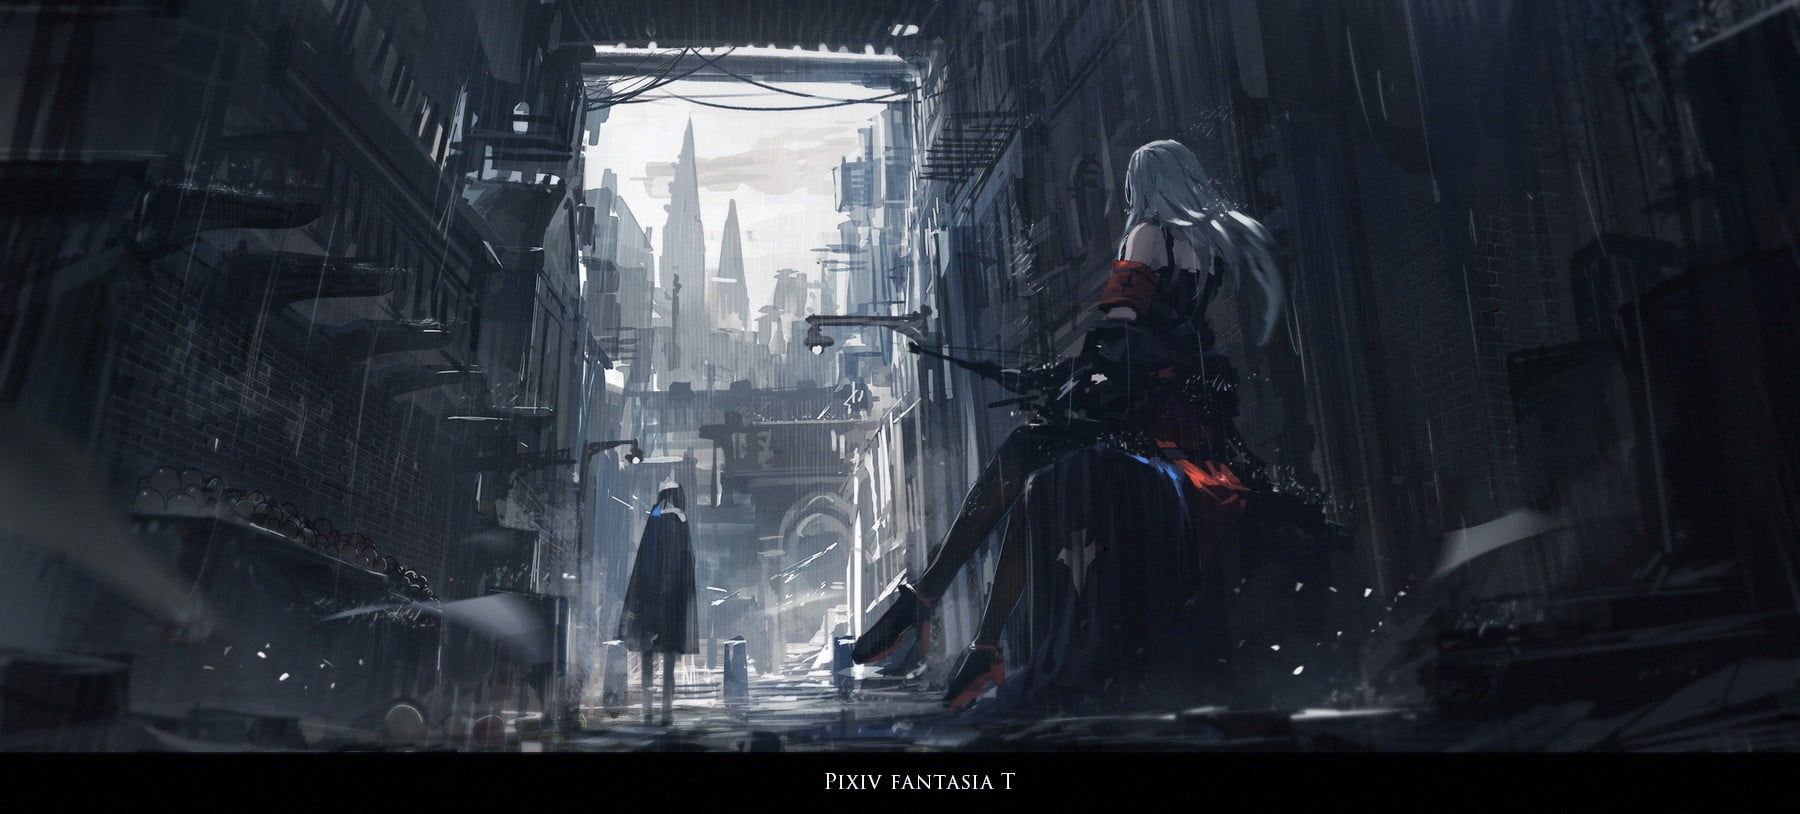 Pixiv Fantasia Rd Wallpapers